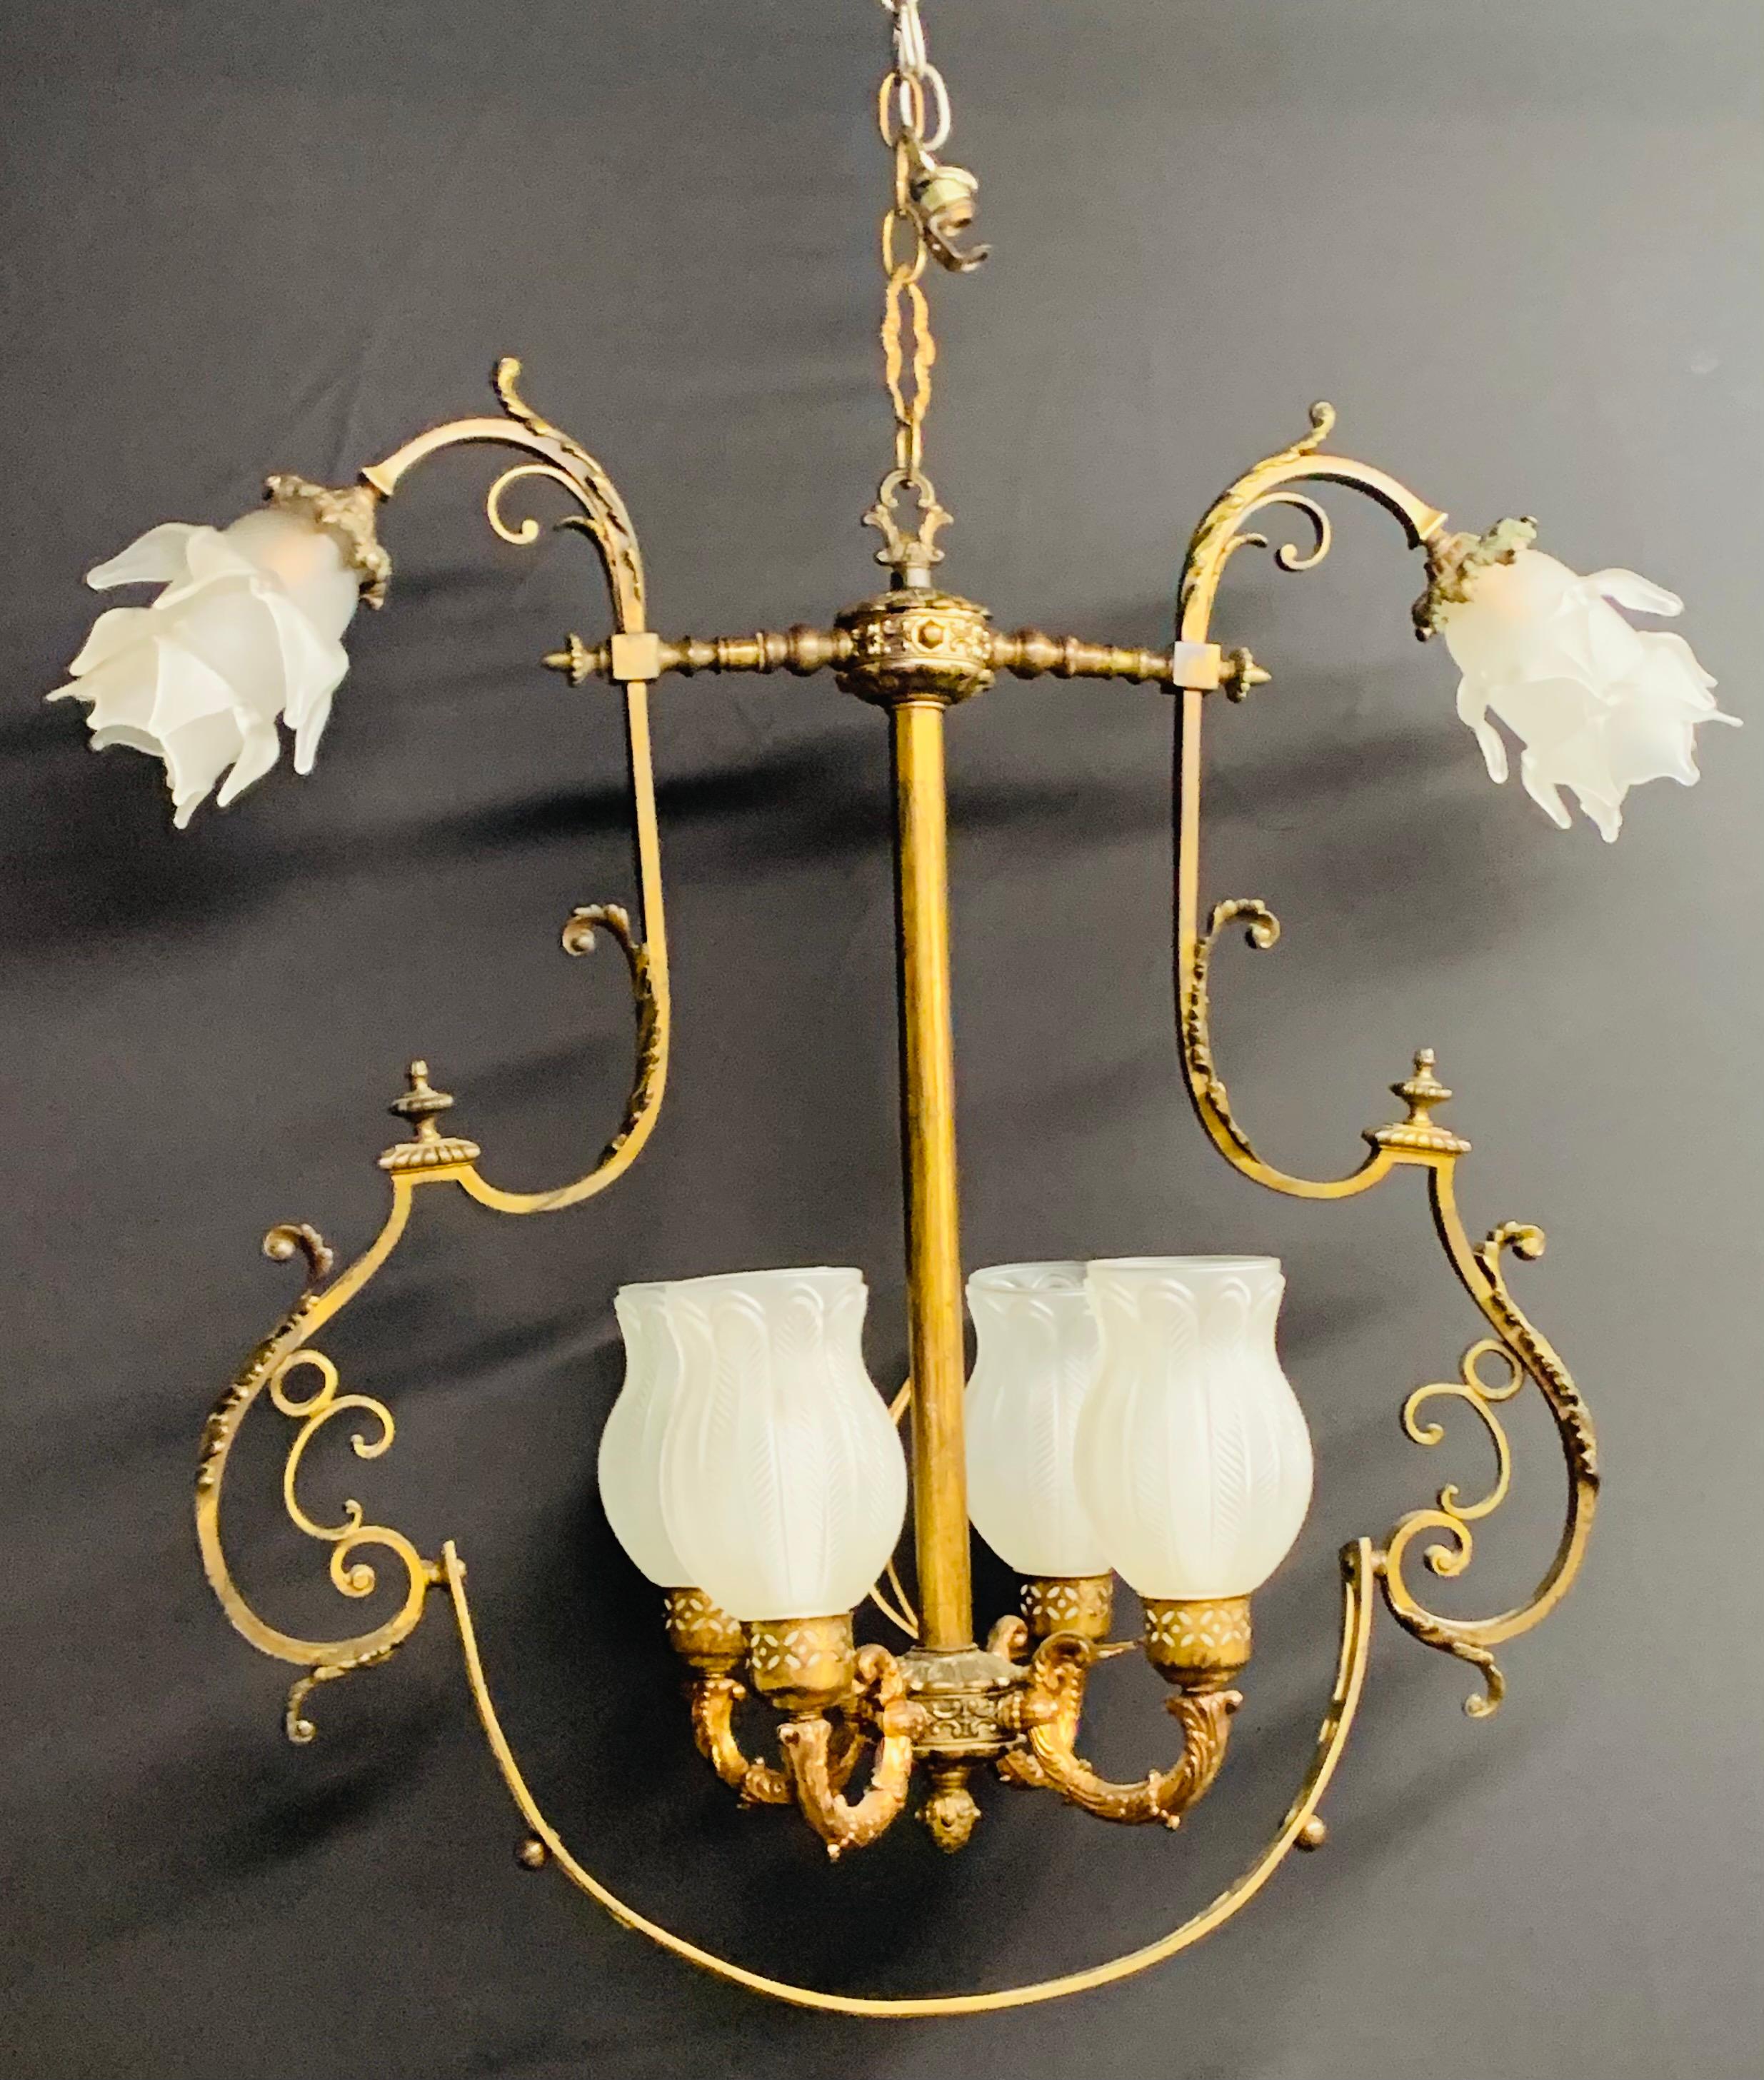 French Victorian Gasolier Bronze Chandelier or Fixture with Original Shades 16